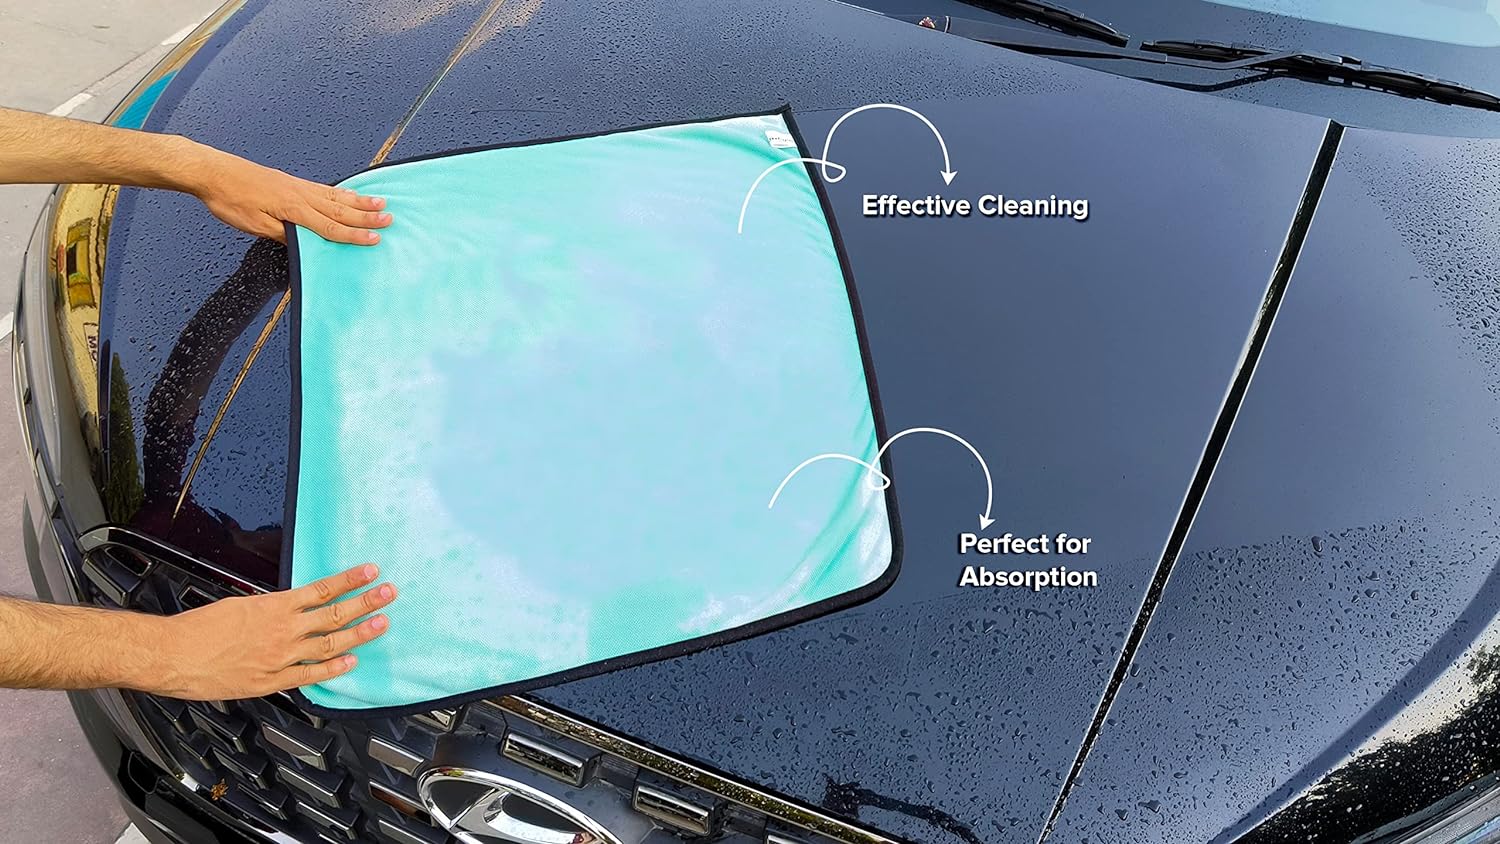 SOFTSPUN Microfiber Cloth for Car - 600 GSM,1Pcs, Twisted Loop Super Absorbent Towel - Plush Pile and Lint Free Cloth for Drying and Detailing.